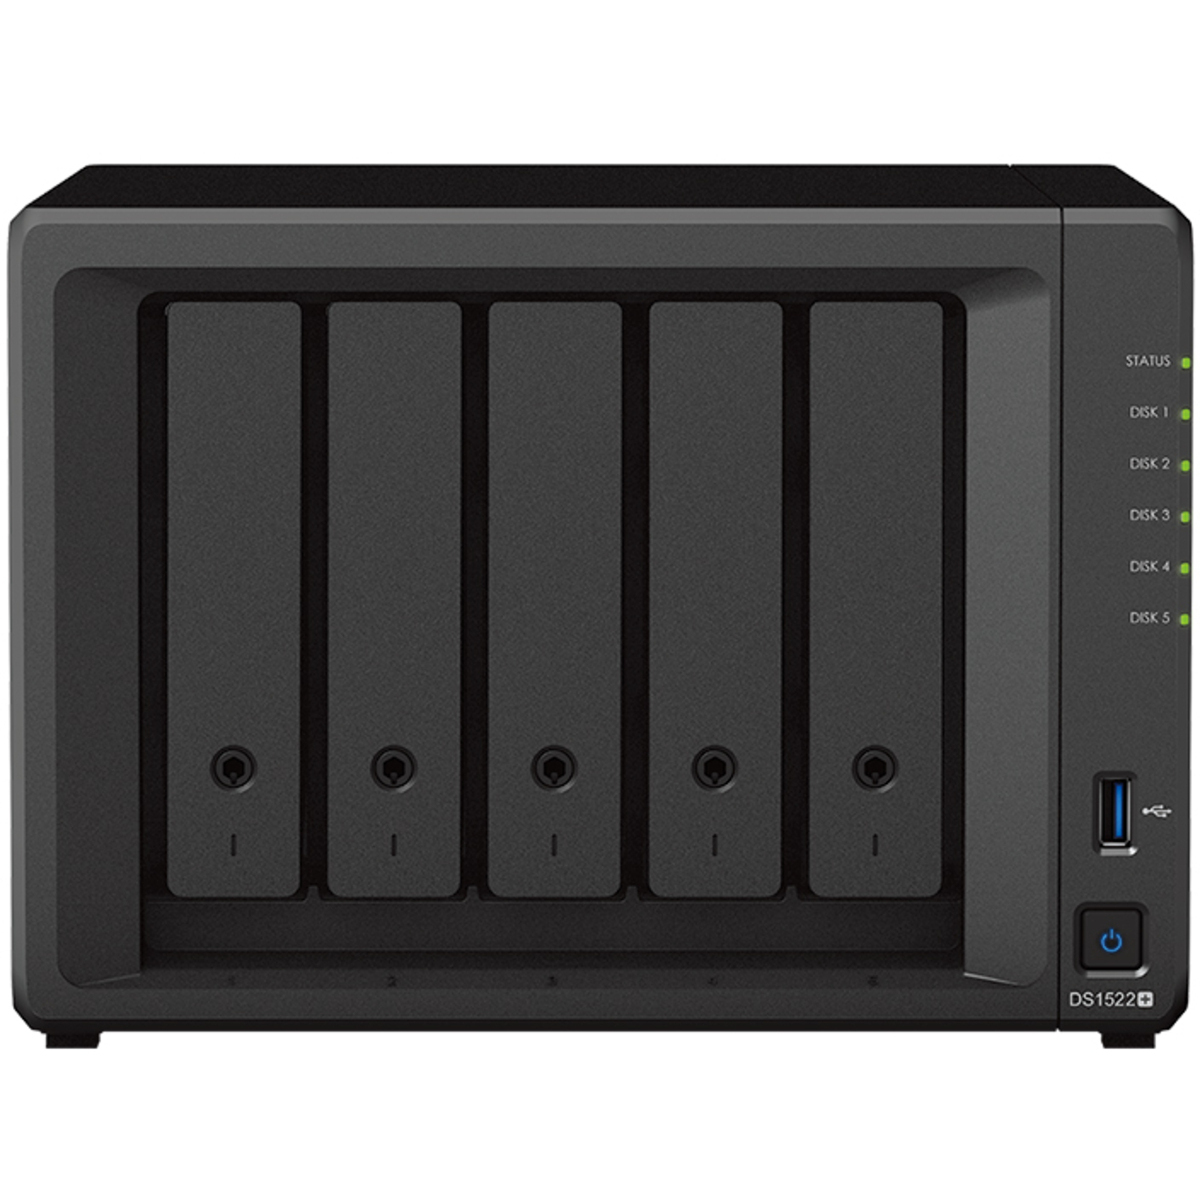 Synology DiskStation DS1522+ 60tb 5-Bay Desktop Multimedia / Power User / Business NAS - Network Attached Storage Device 5x12tb Western Digital Ultrastar DC HC520 HUH721212ALE600 3.5 7200rpm SATA 6Gb/s HDD ENTERPRISE Class Drives Installed - Burn-In Tested - ON SALE DiskStation DS1522+